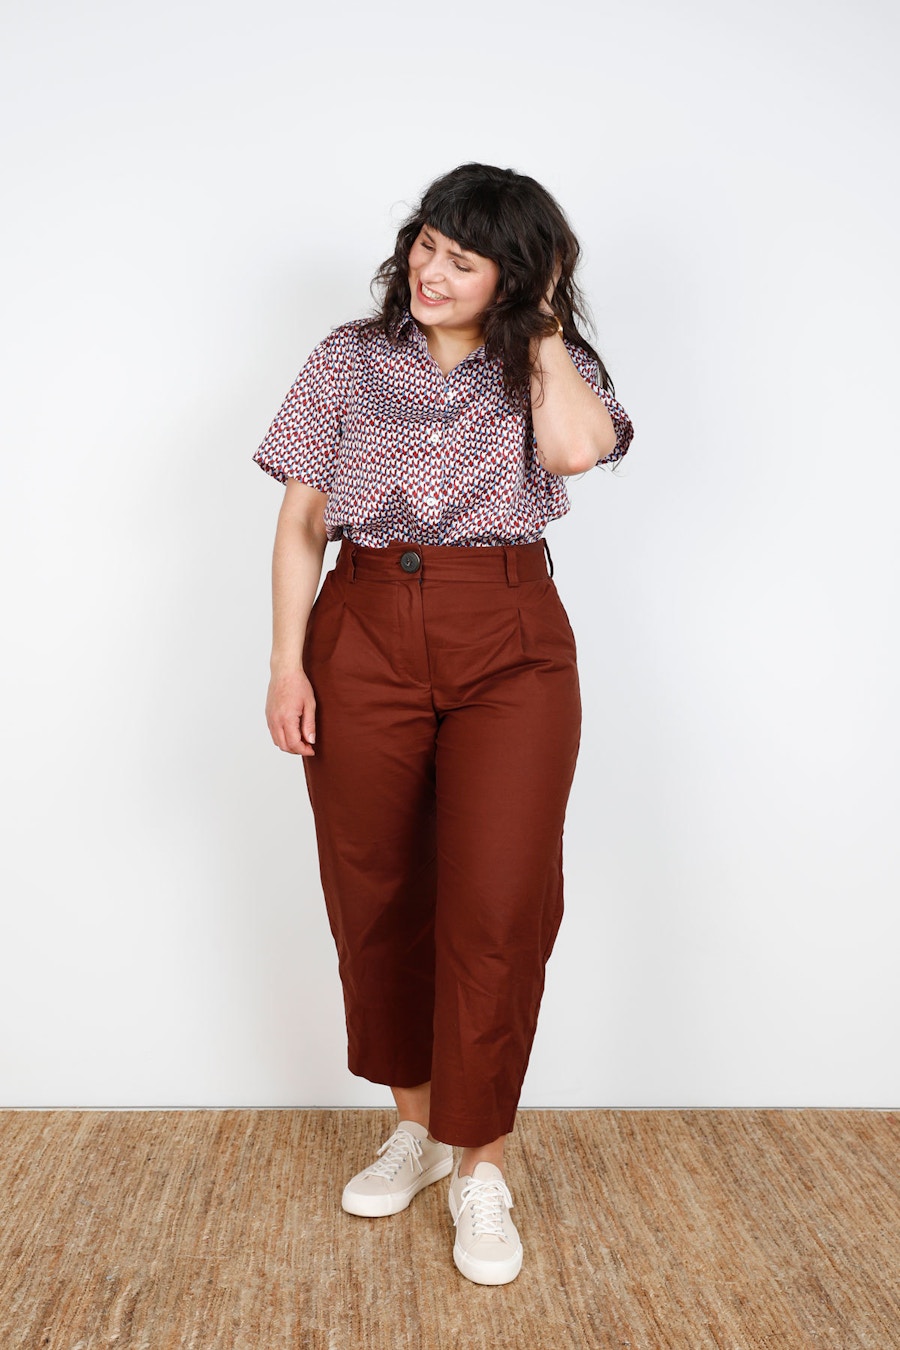 Front Tucked Bloom Shirt in Prints Cass Pant Make by TFS